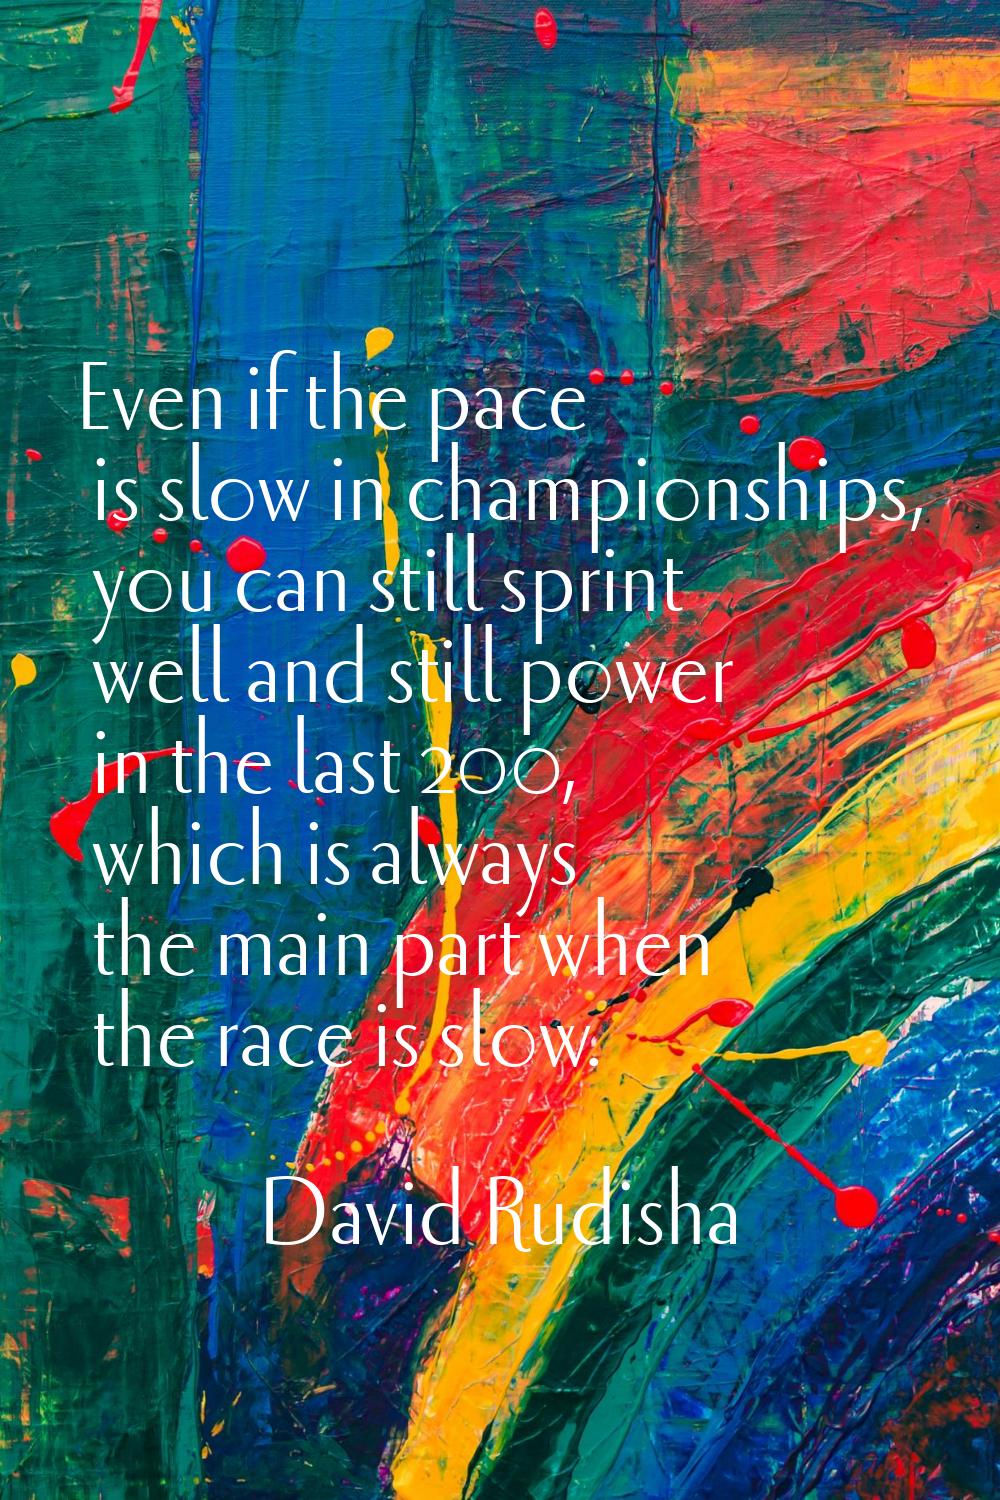 Even if the pace is slow in championships, you can still sprint well and still power in the last 20